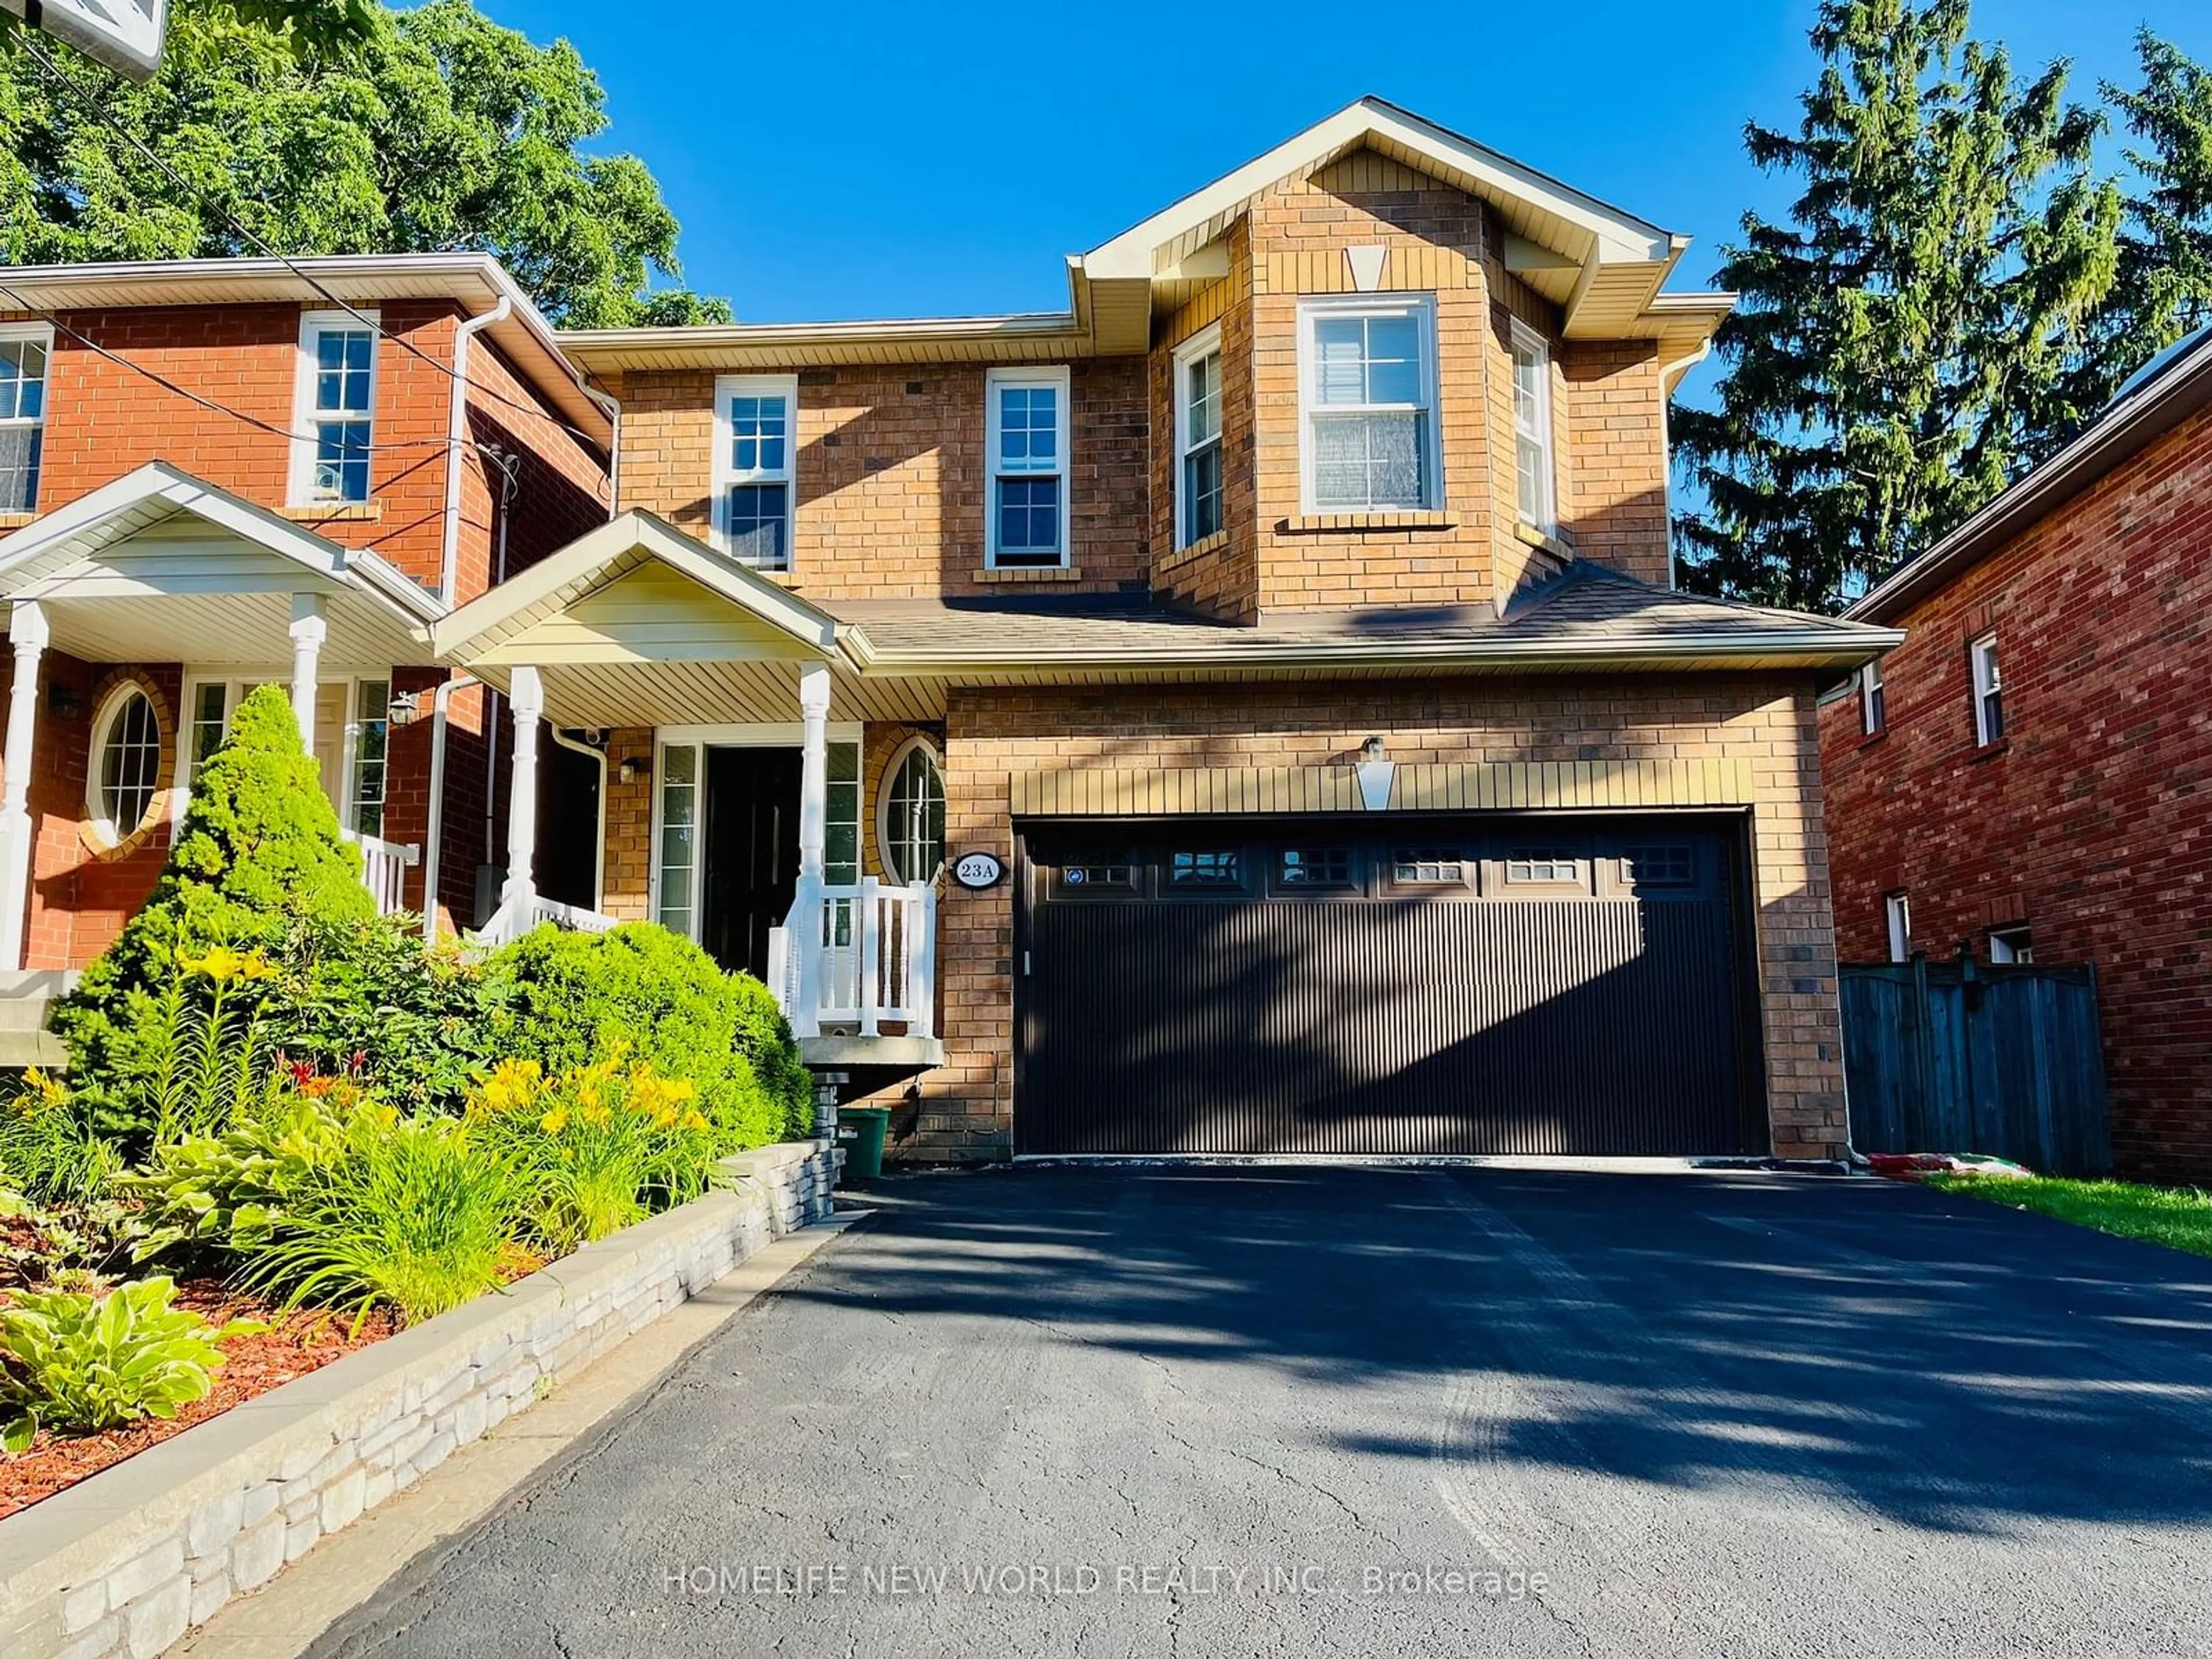 Home with brick exterior material for 23A Wilson St, Markham Ontario L3P 1M9